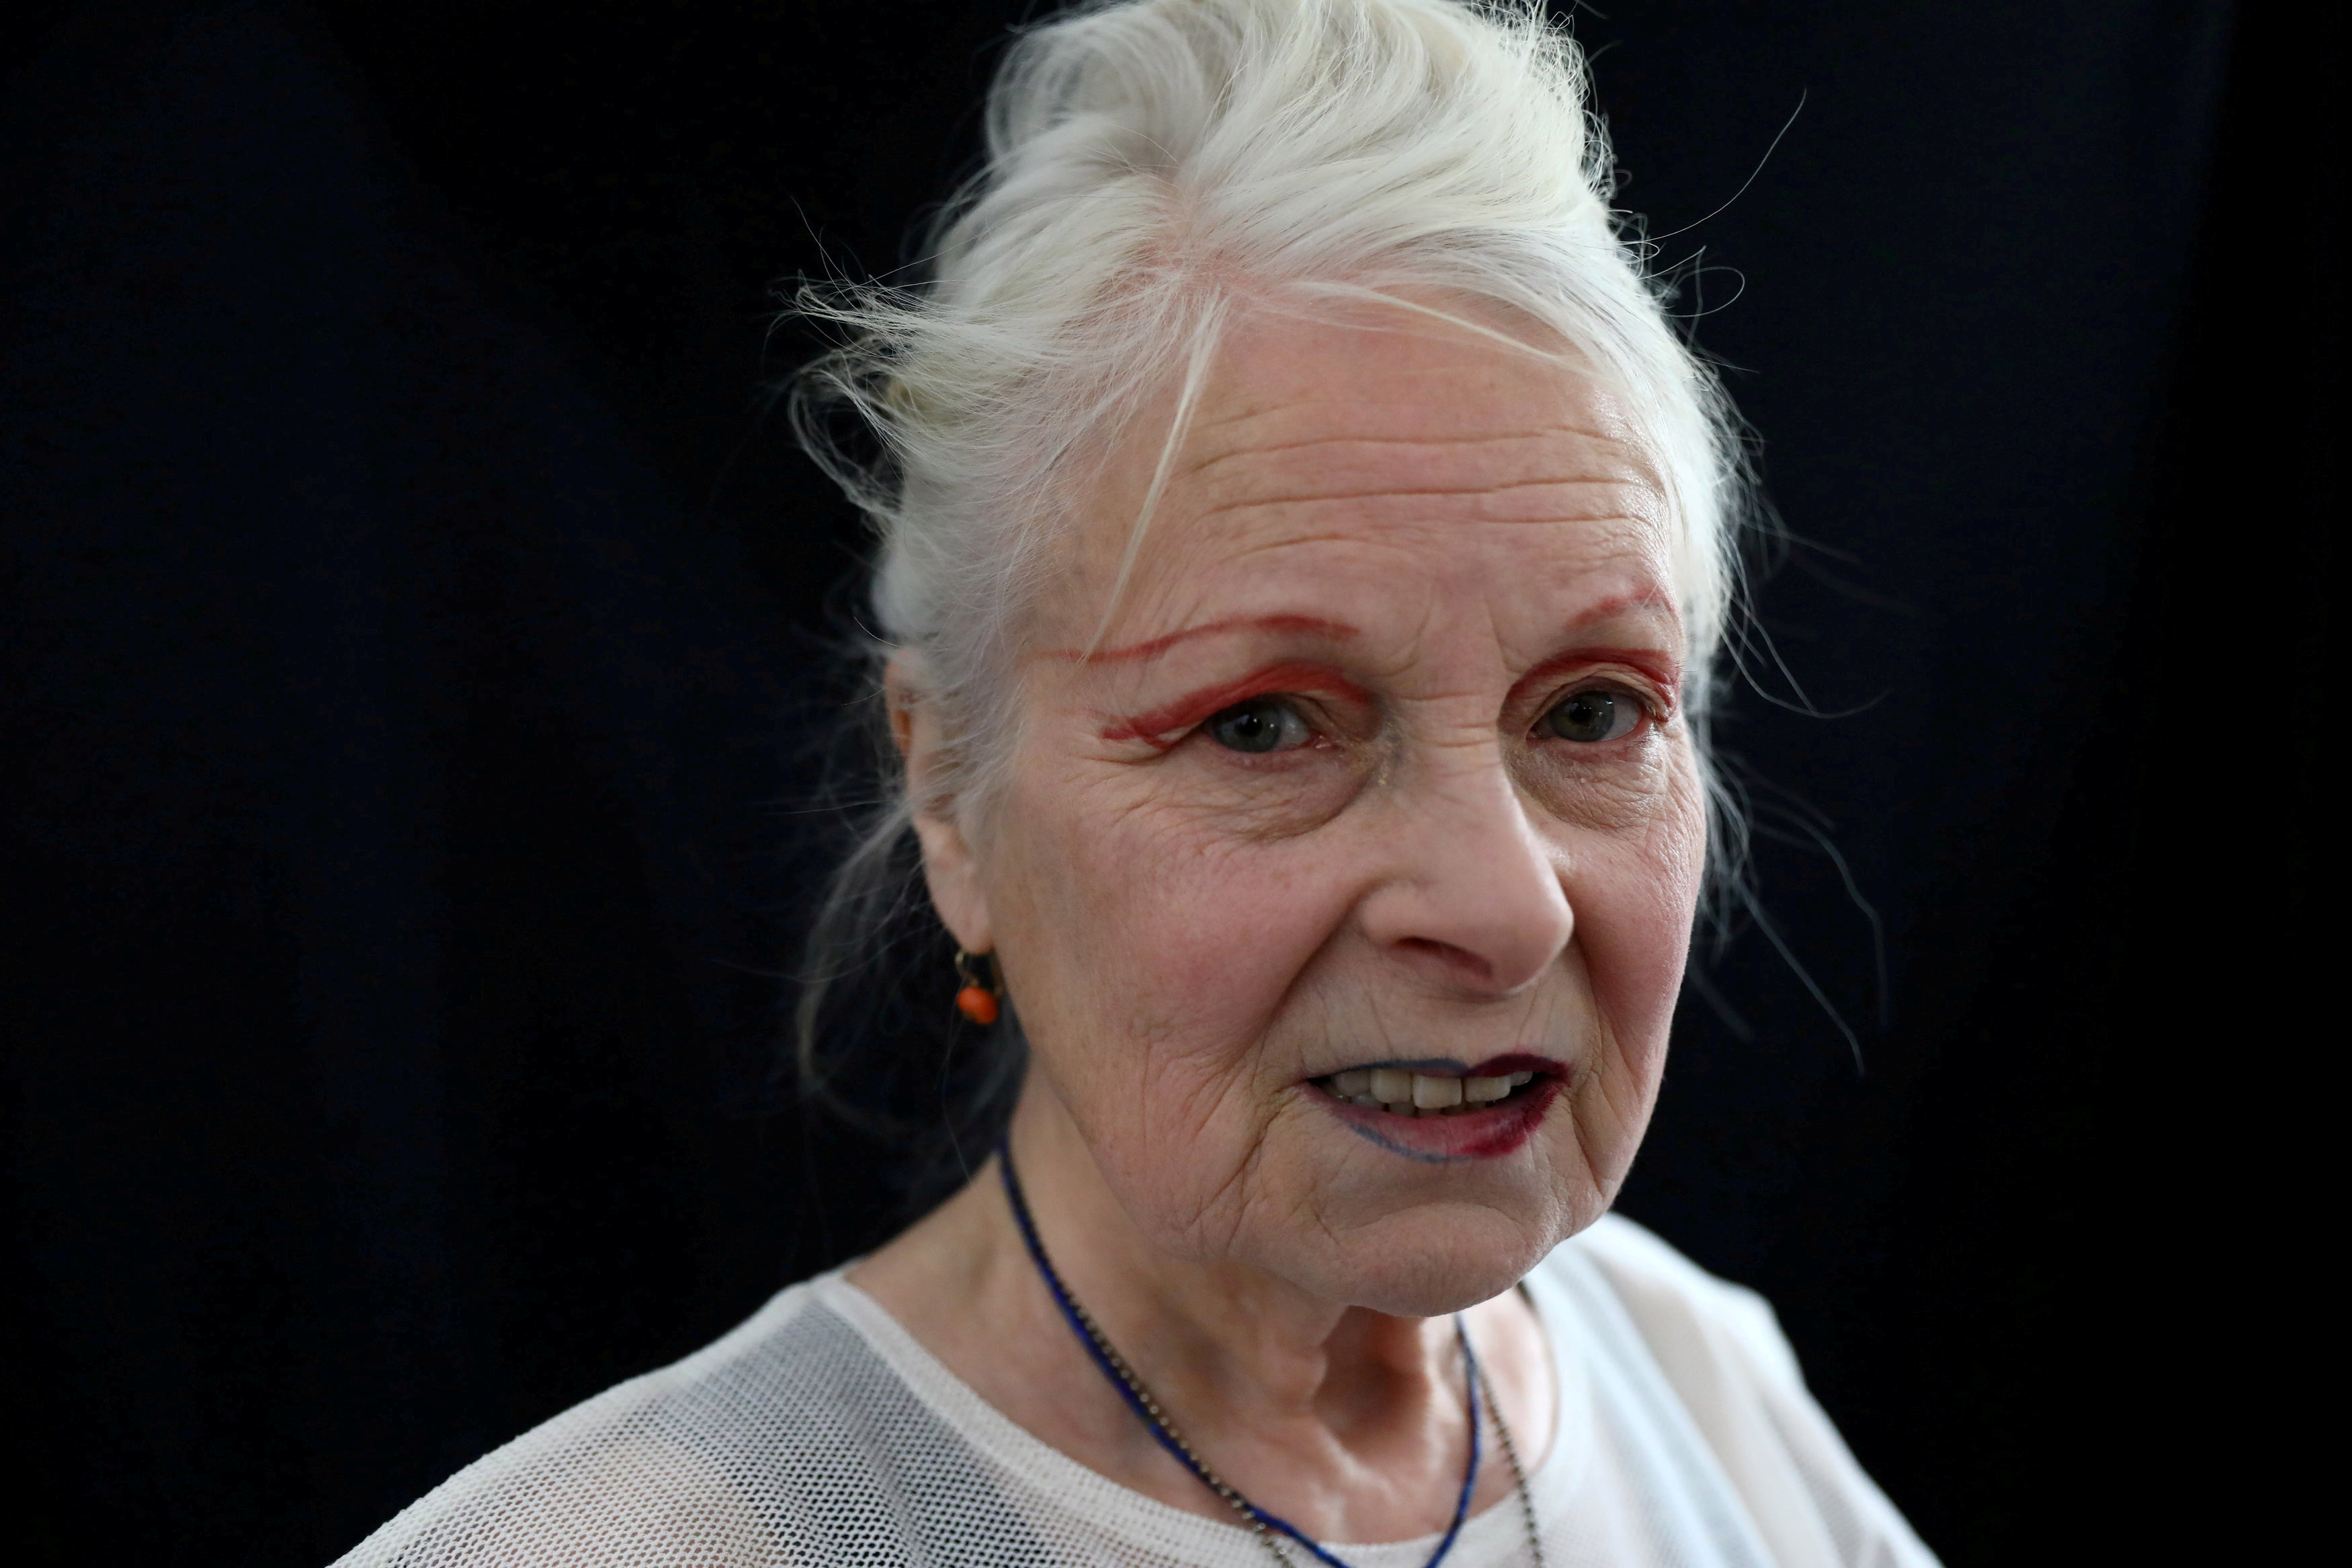 vivienne westwood, queen of british fashion, passes away aged 81